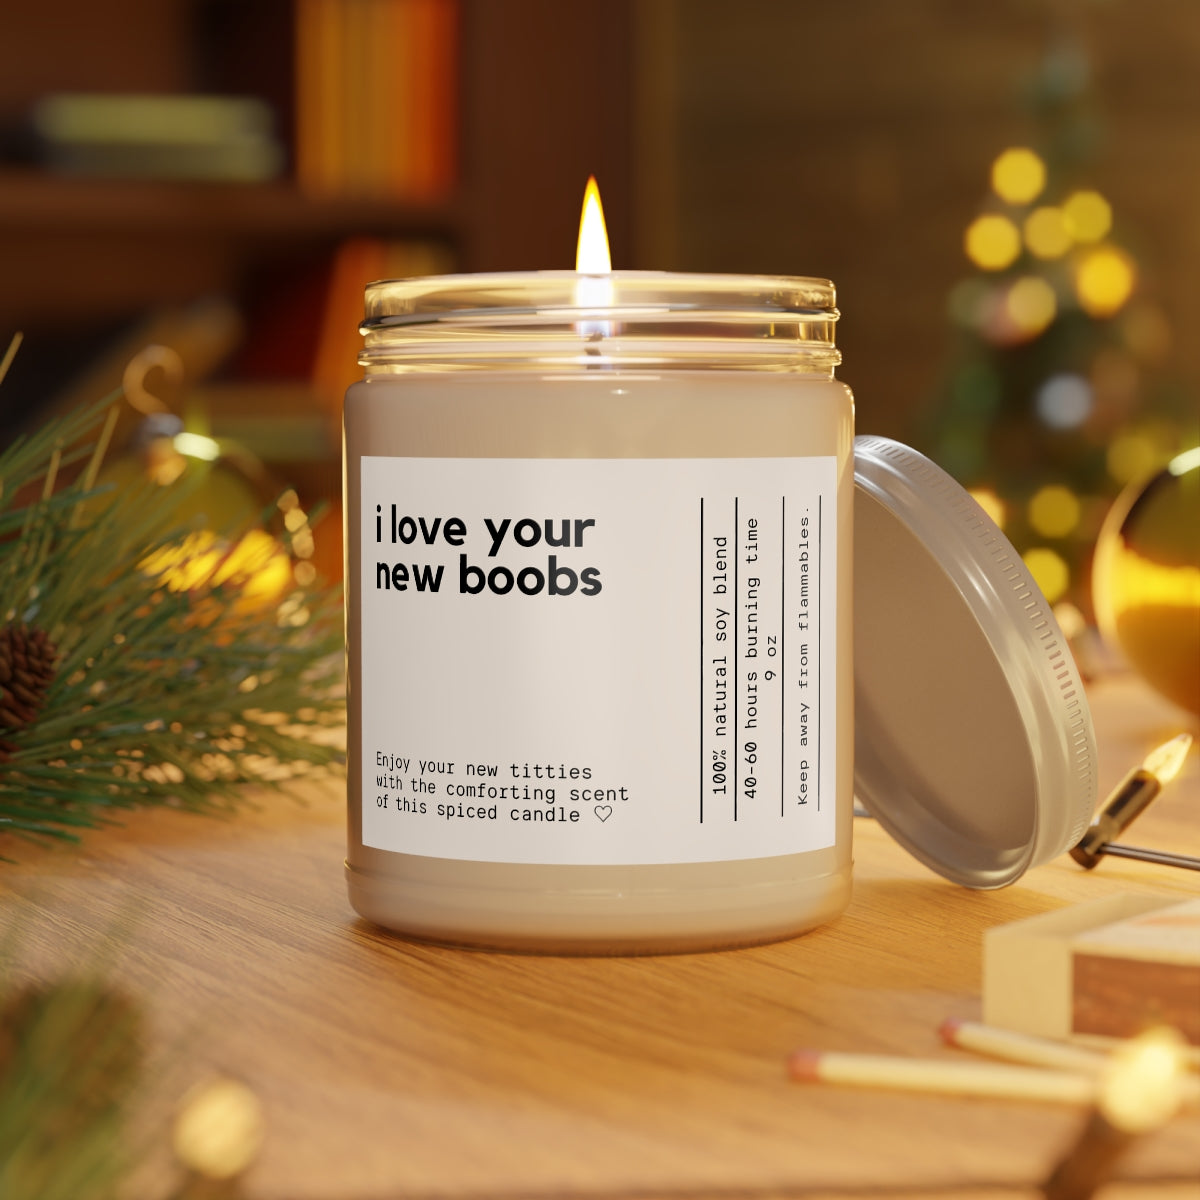 I Love Your New Boobs Spice-Scented Candle (9oz)